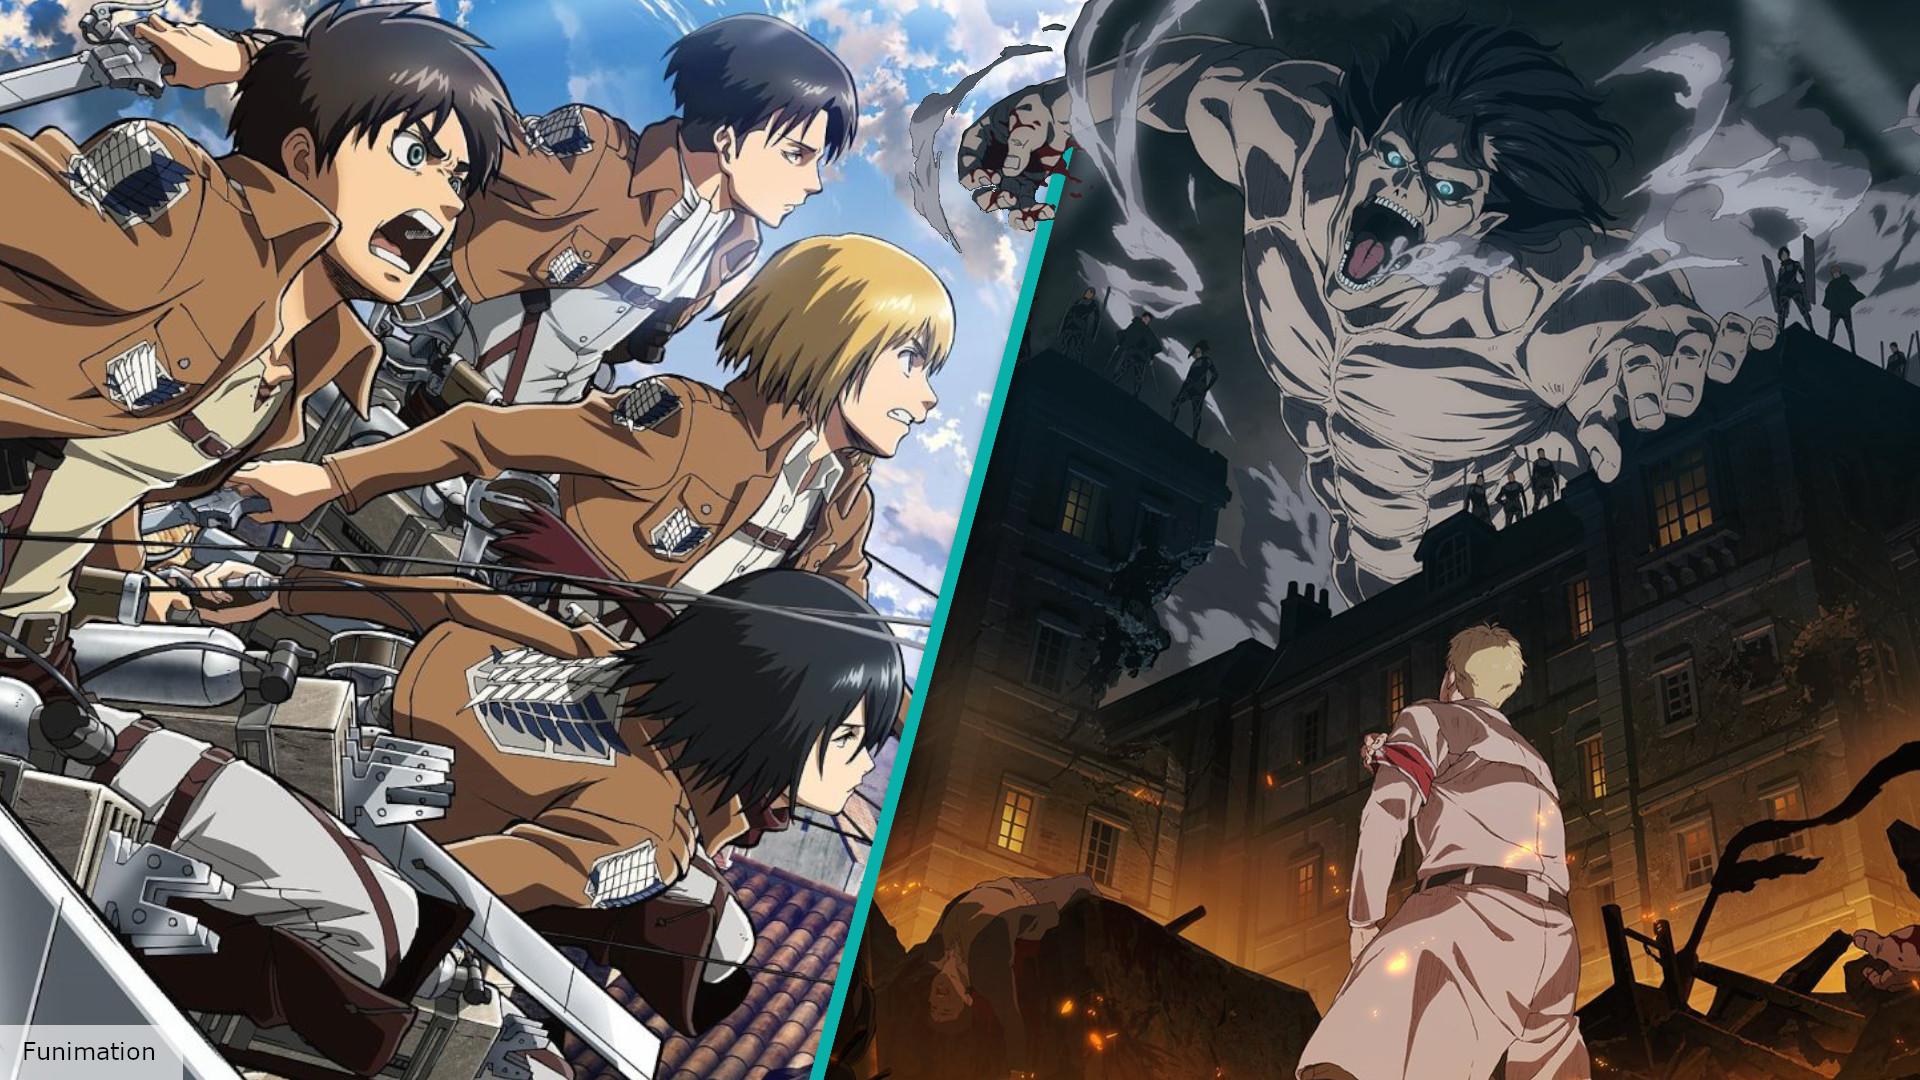 Will there be a sequel to Attack on Titan?